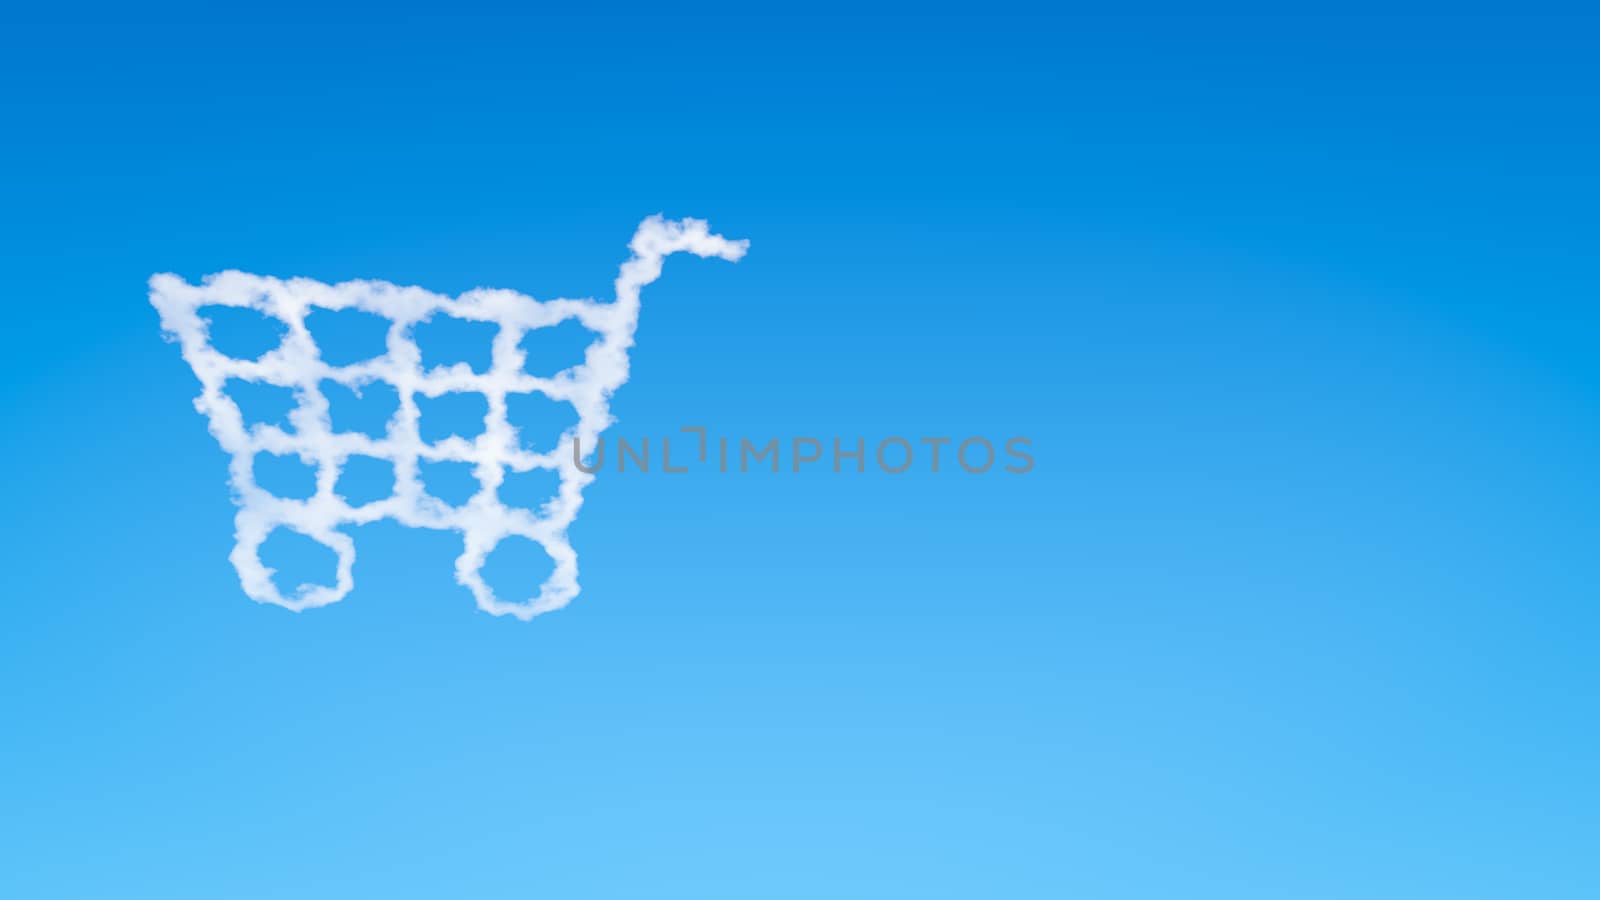 Shopping Cart Symbol Shape Cloud in the Blue Sky with Copyspace